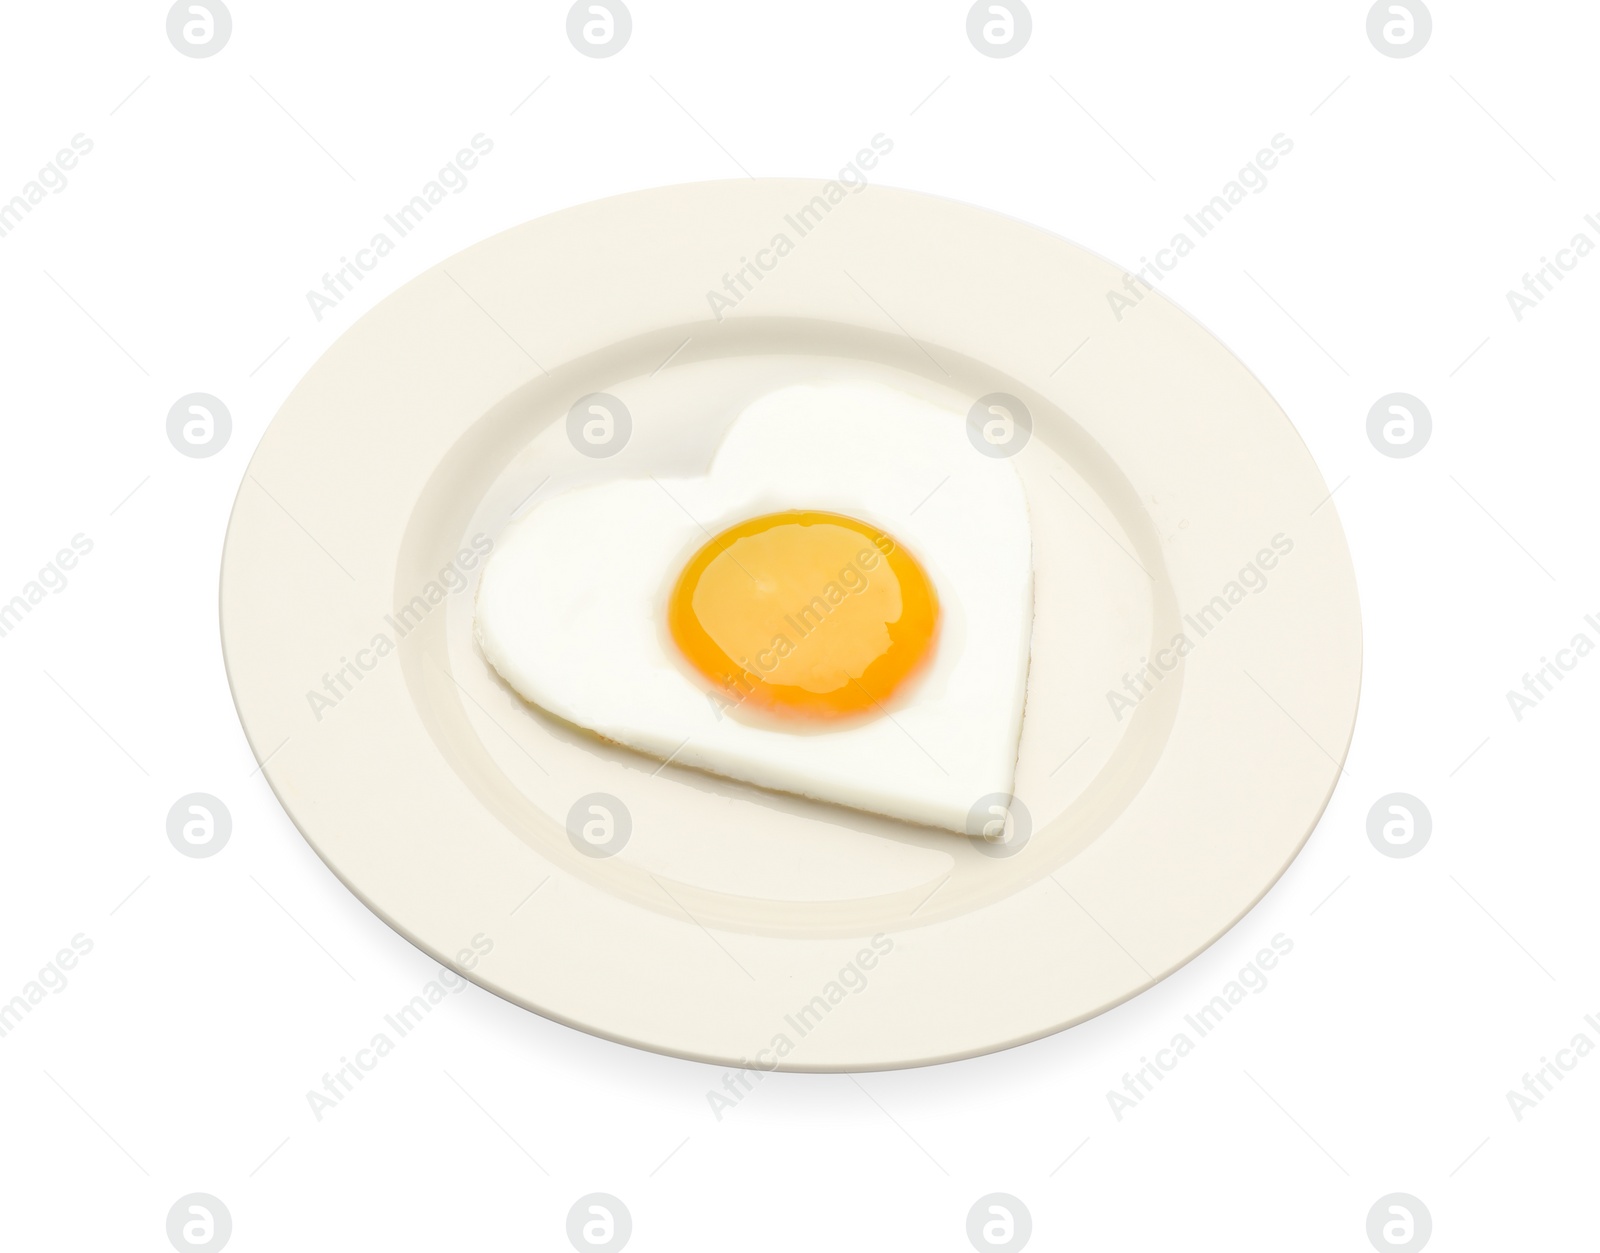 Photo of Plate with tasty fried egg in shape of heart and toast isolated on white